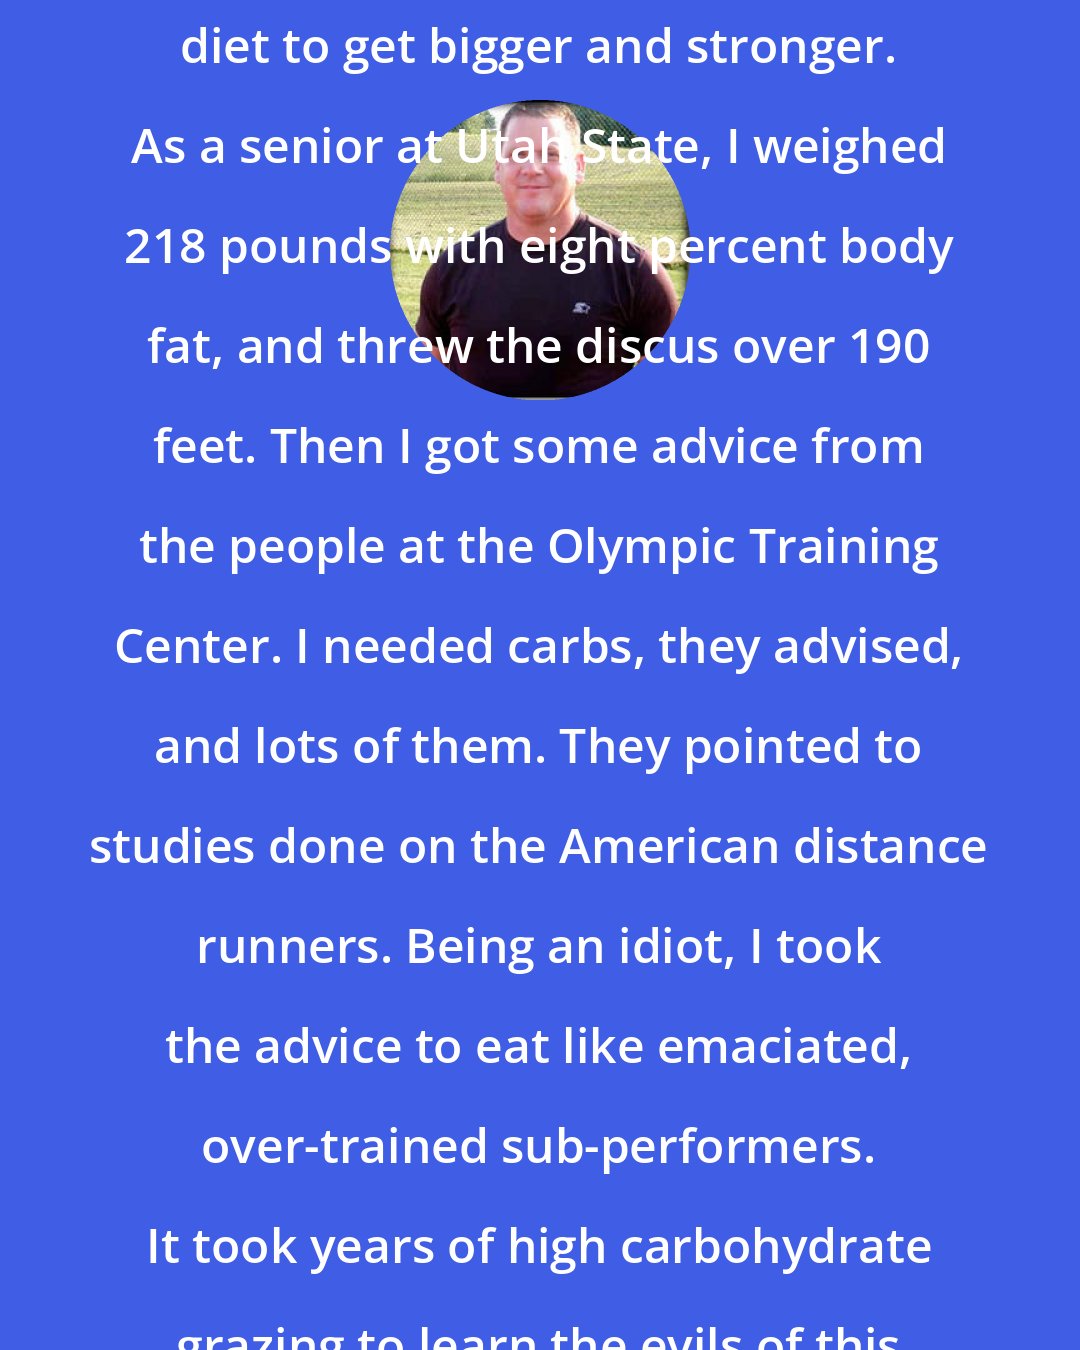 Dan John: Back in the 1970s, I ate a high-protein diet to get bigger and stronger. As a senior at Utah State, I weighed 218 pounds with eight percent body fat, and threw the discus over 190 feet. Then I got some advice from the people at the Olympic Training Center. I needed carbs, they advised, and lots of them. They pointed to studies done on the American distance runners. Being an idiot, I took the advice to eat like emaciated, over-trained sub-performers. It took years of high carbohydrate grazing to learn the evils of this advice.